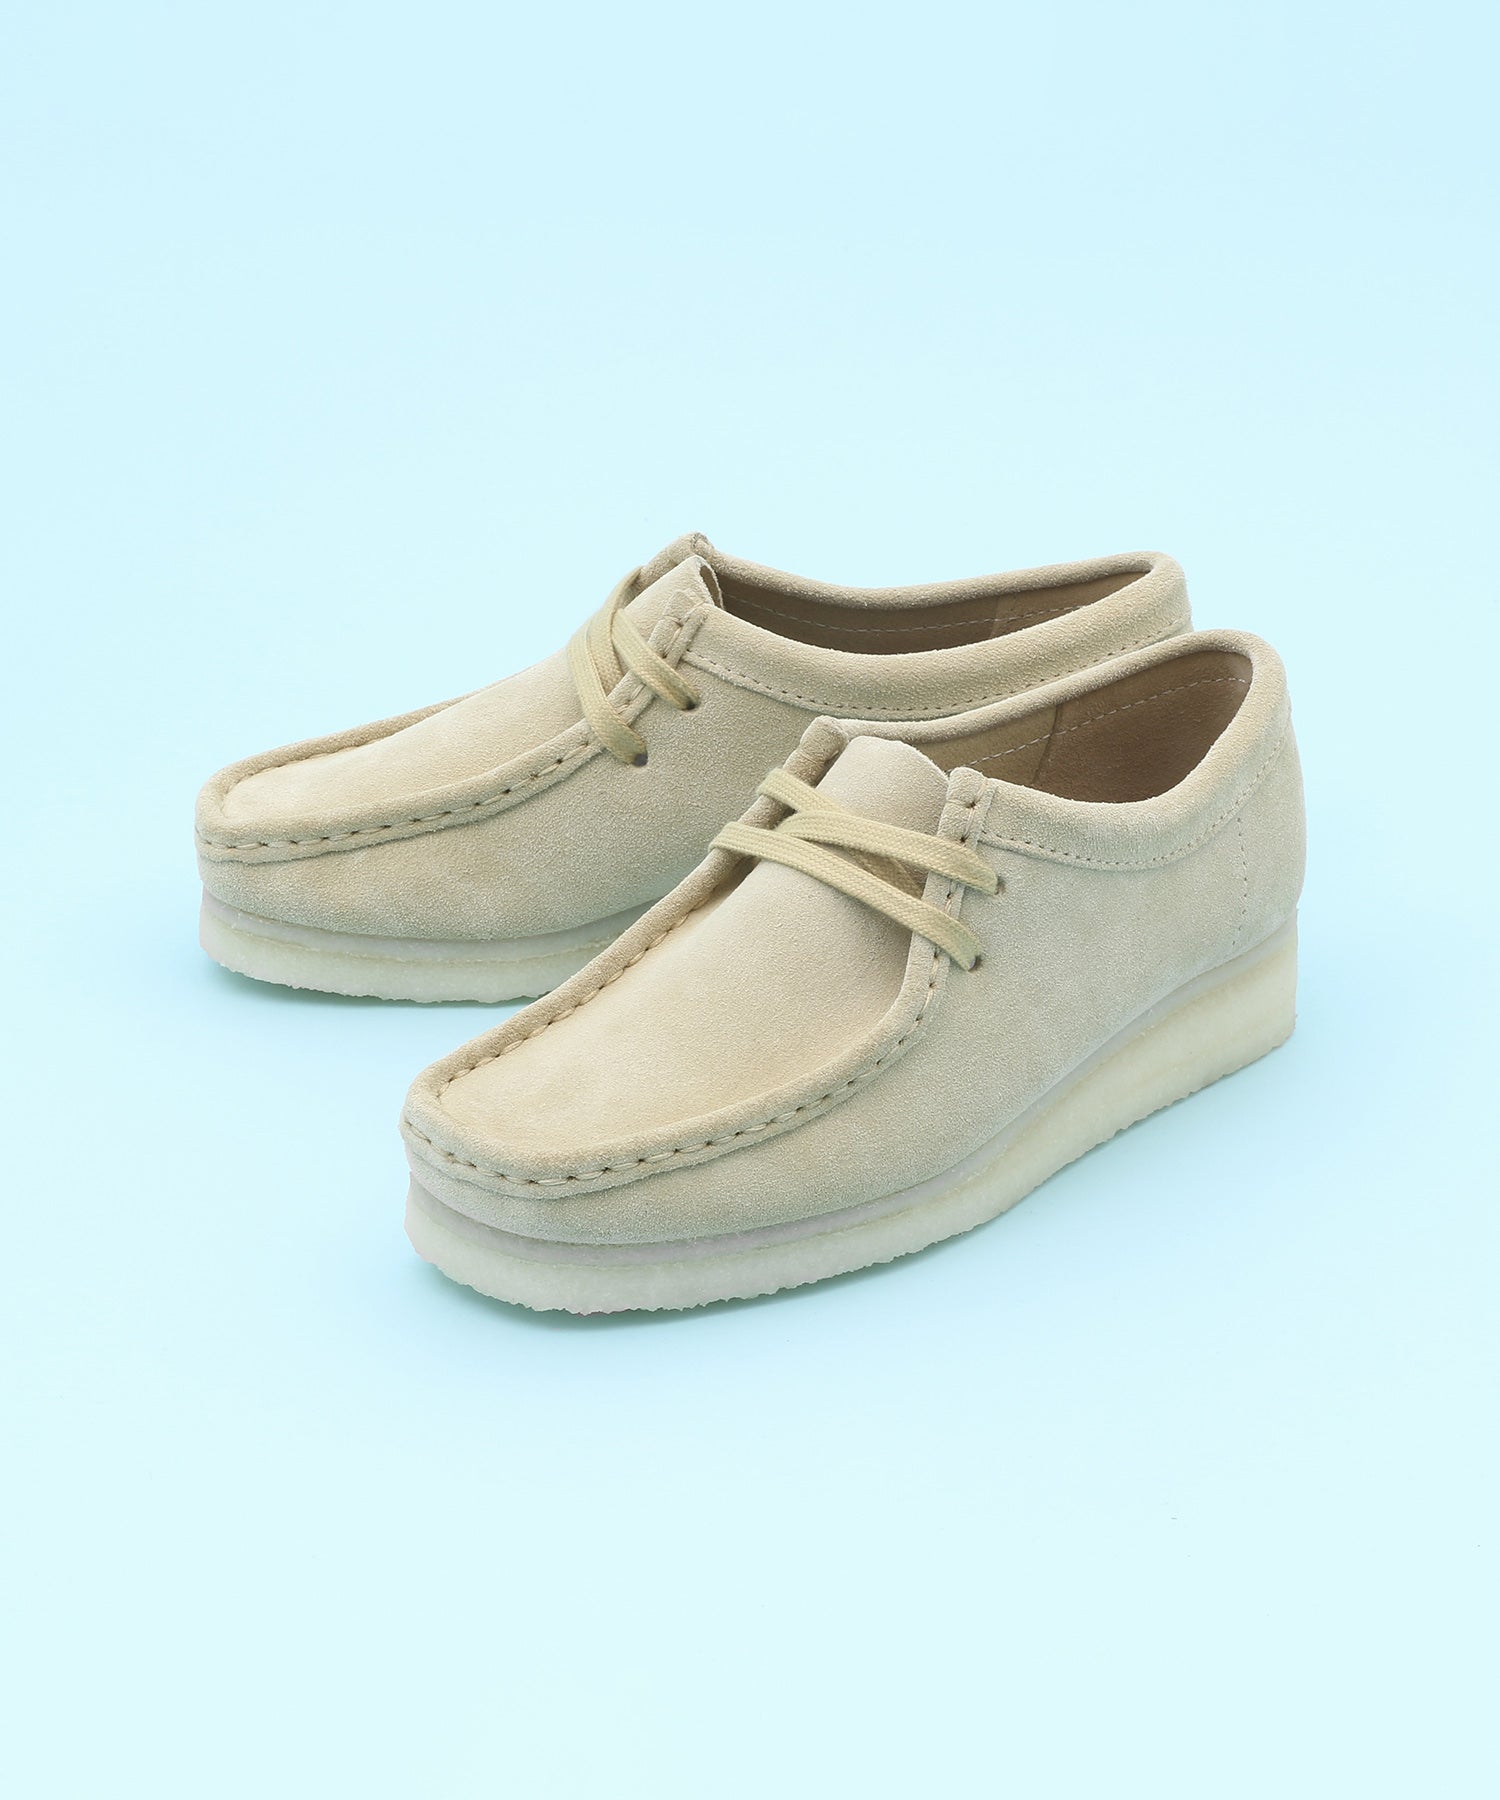 Wallabee. Maple Suede｜スニーカー・ファッションのForget-me-nots